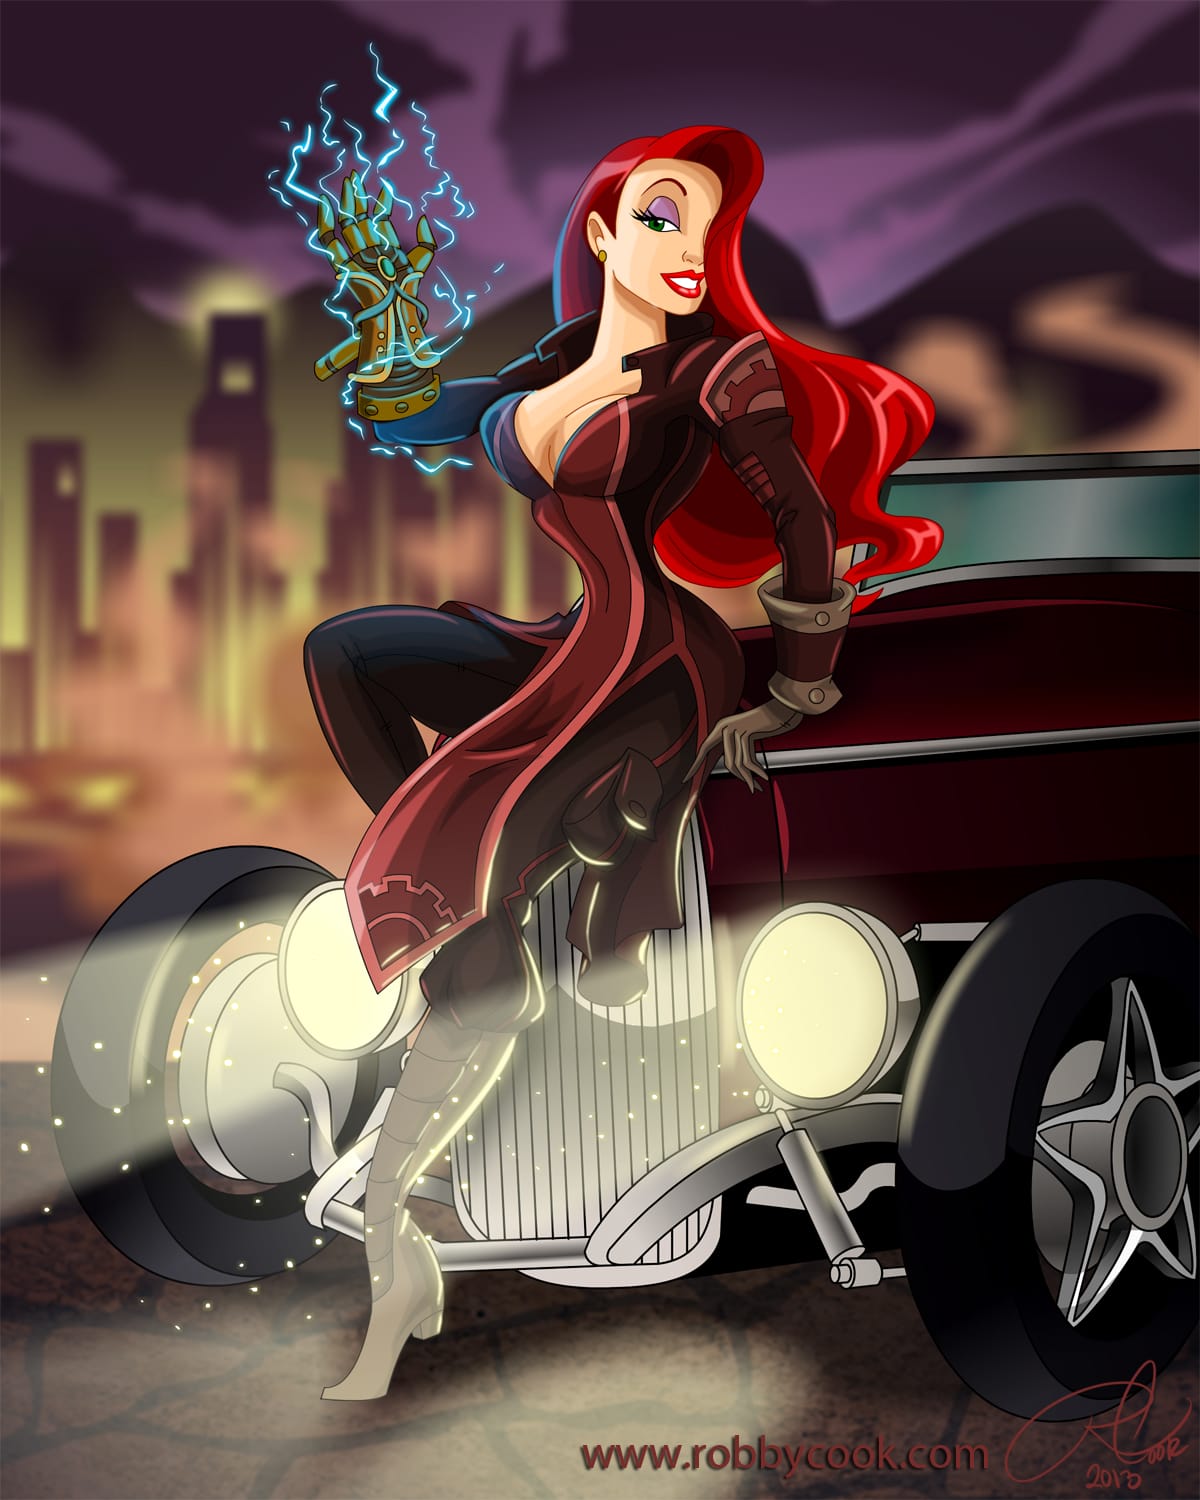 jessica rabbit Articles - Geek, Anime and RPG news